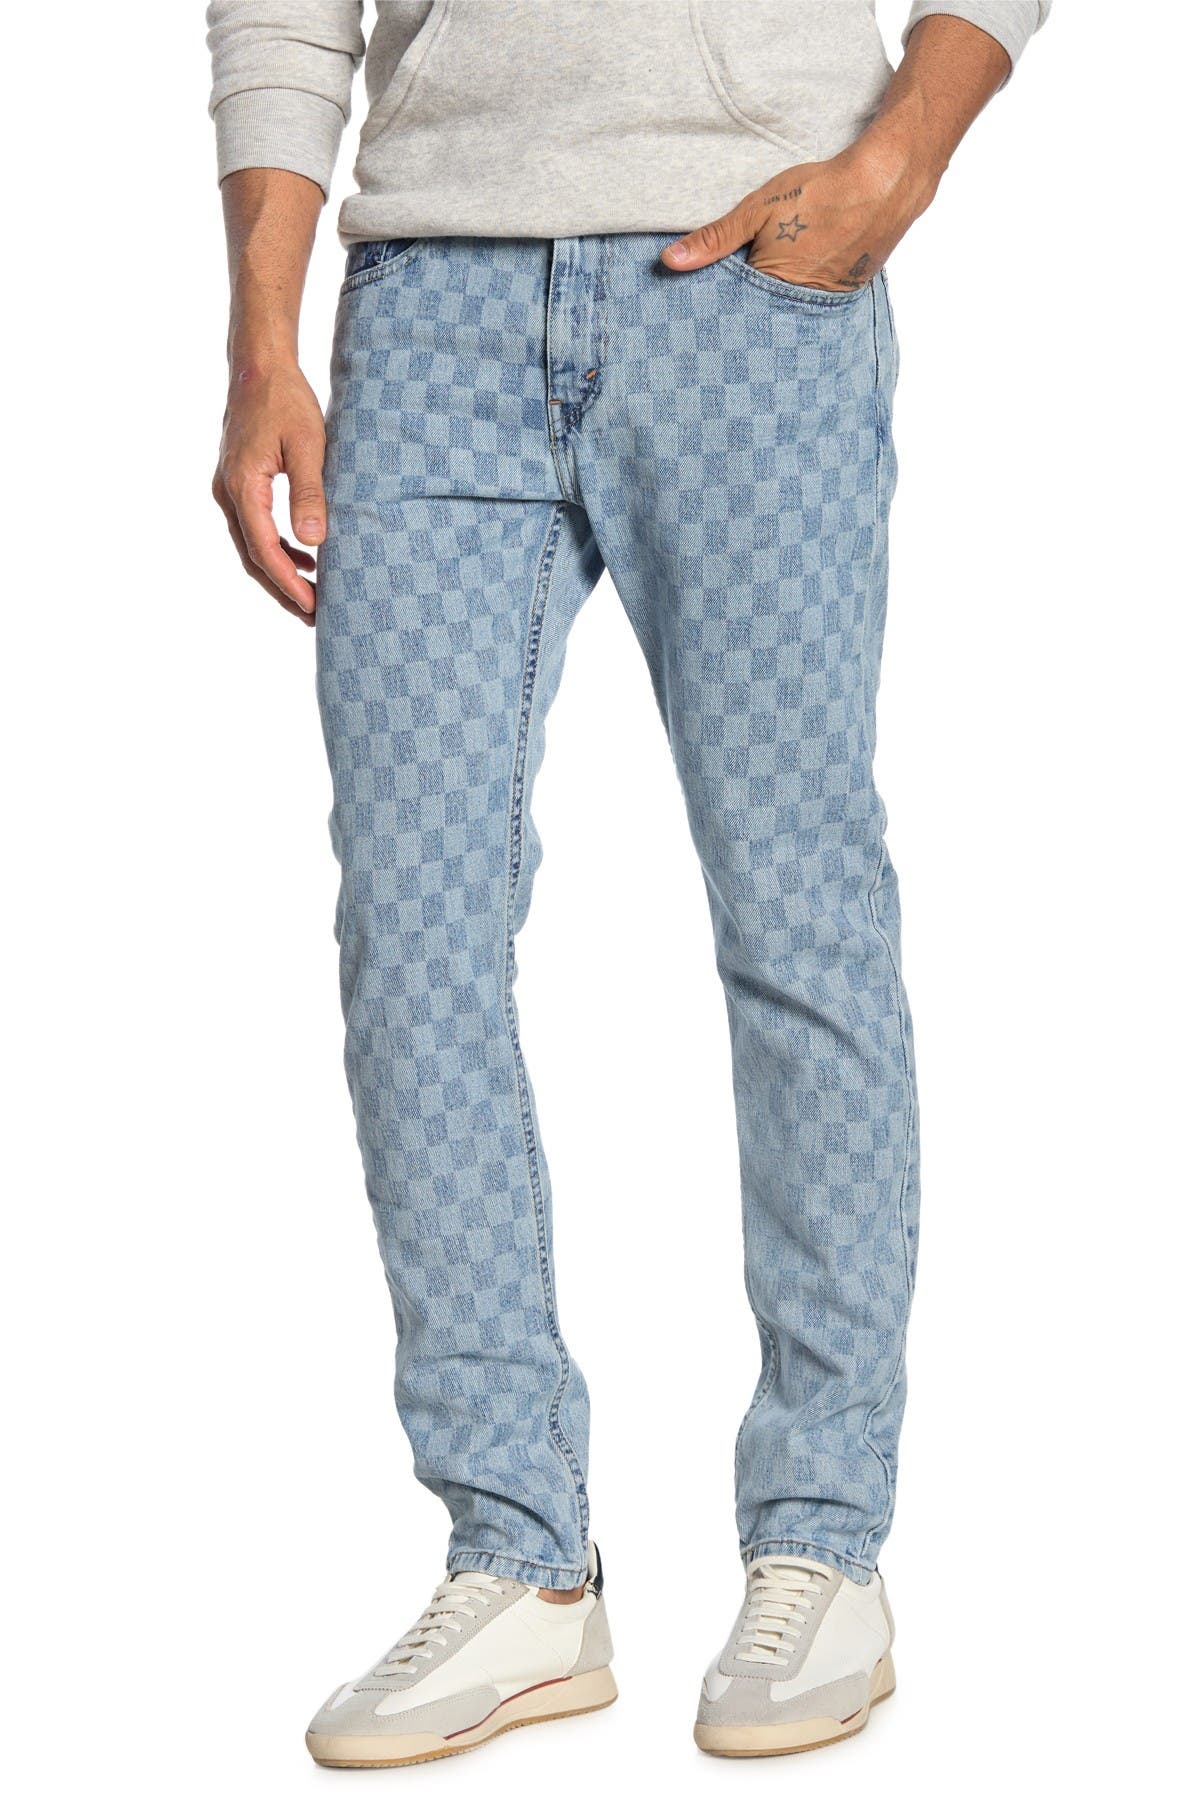 blue checkered jeans